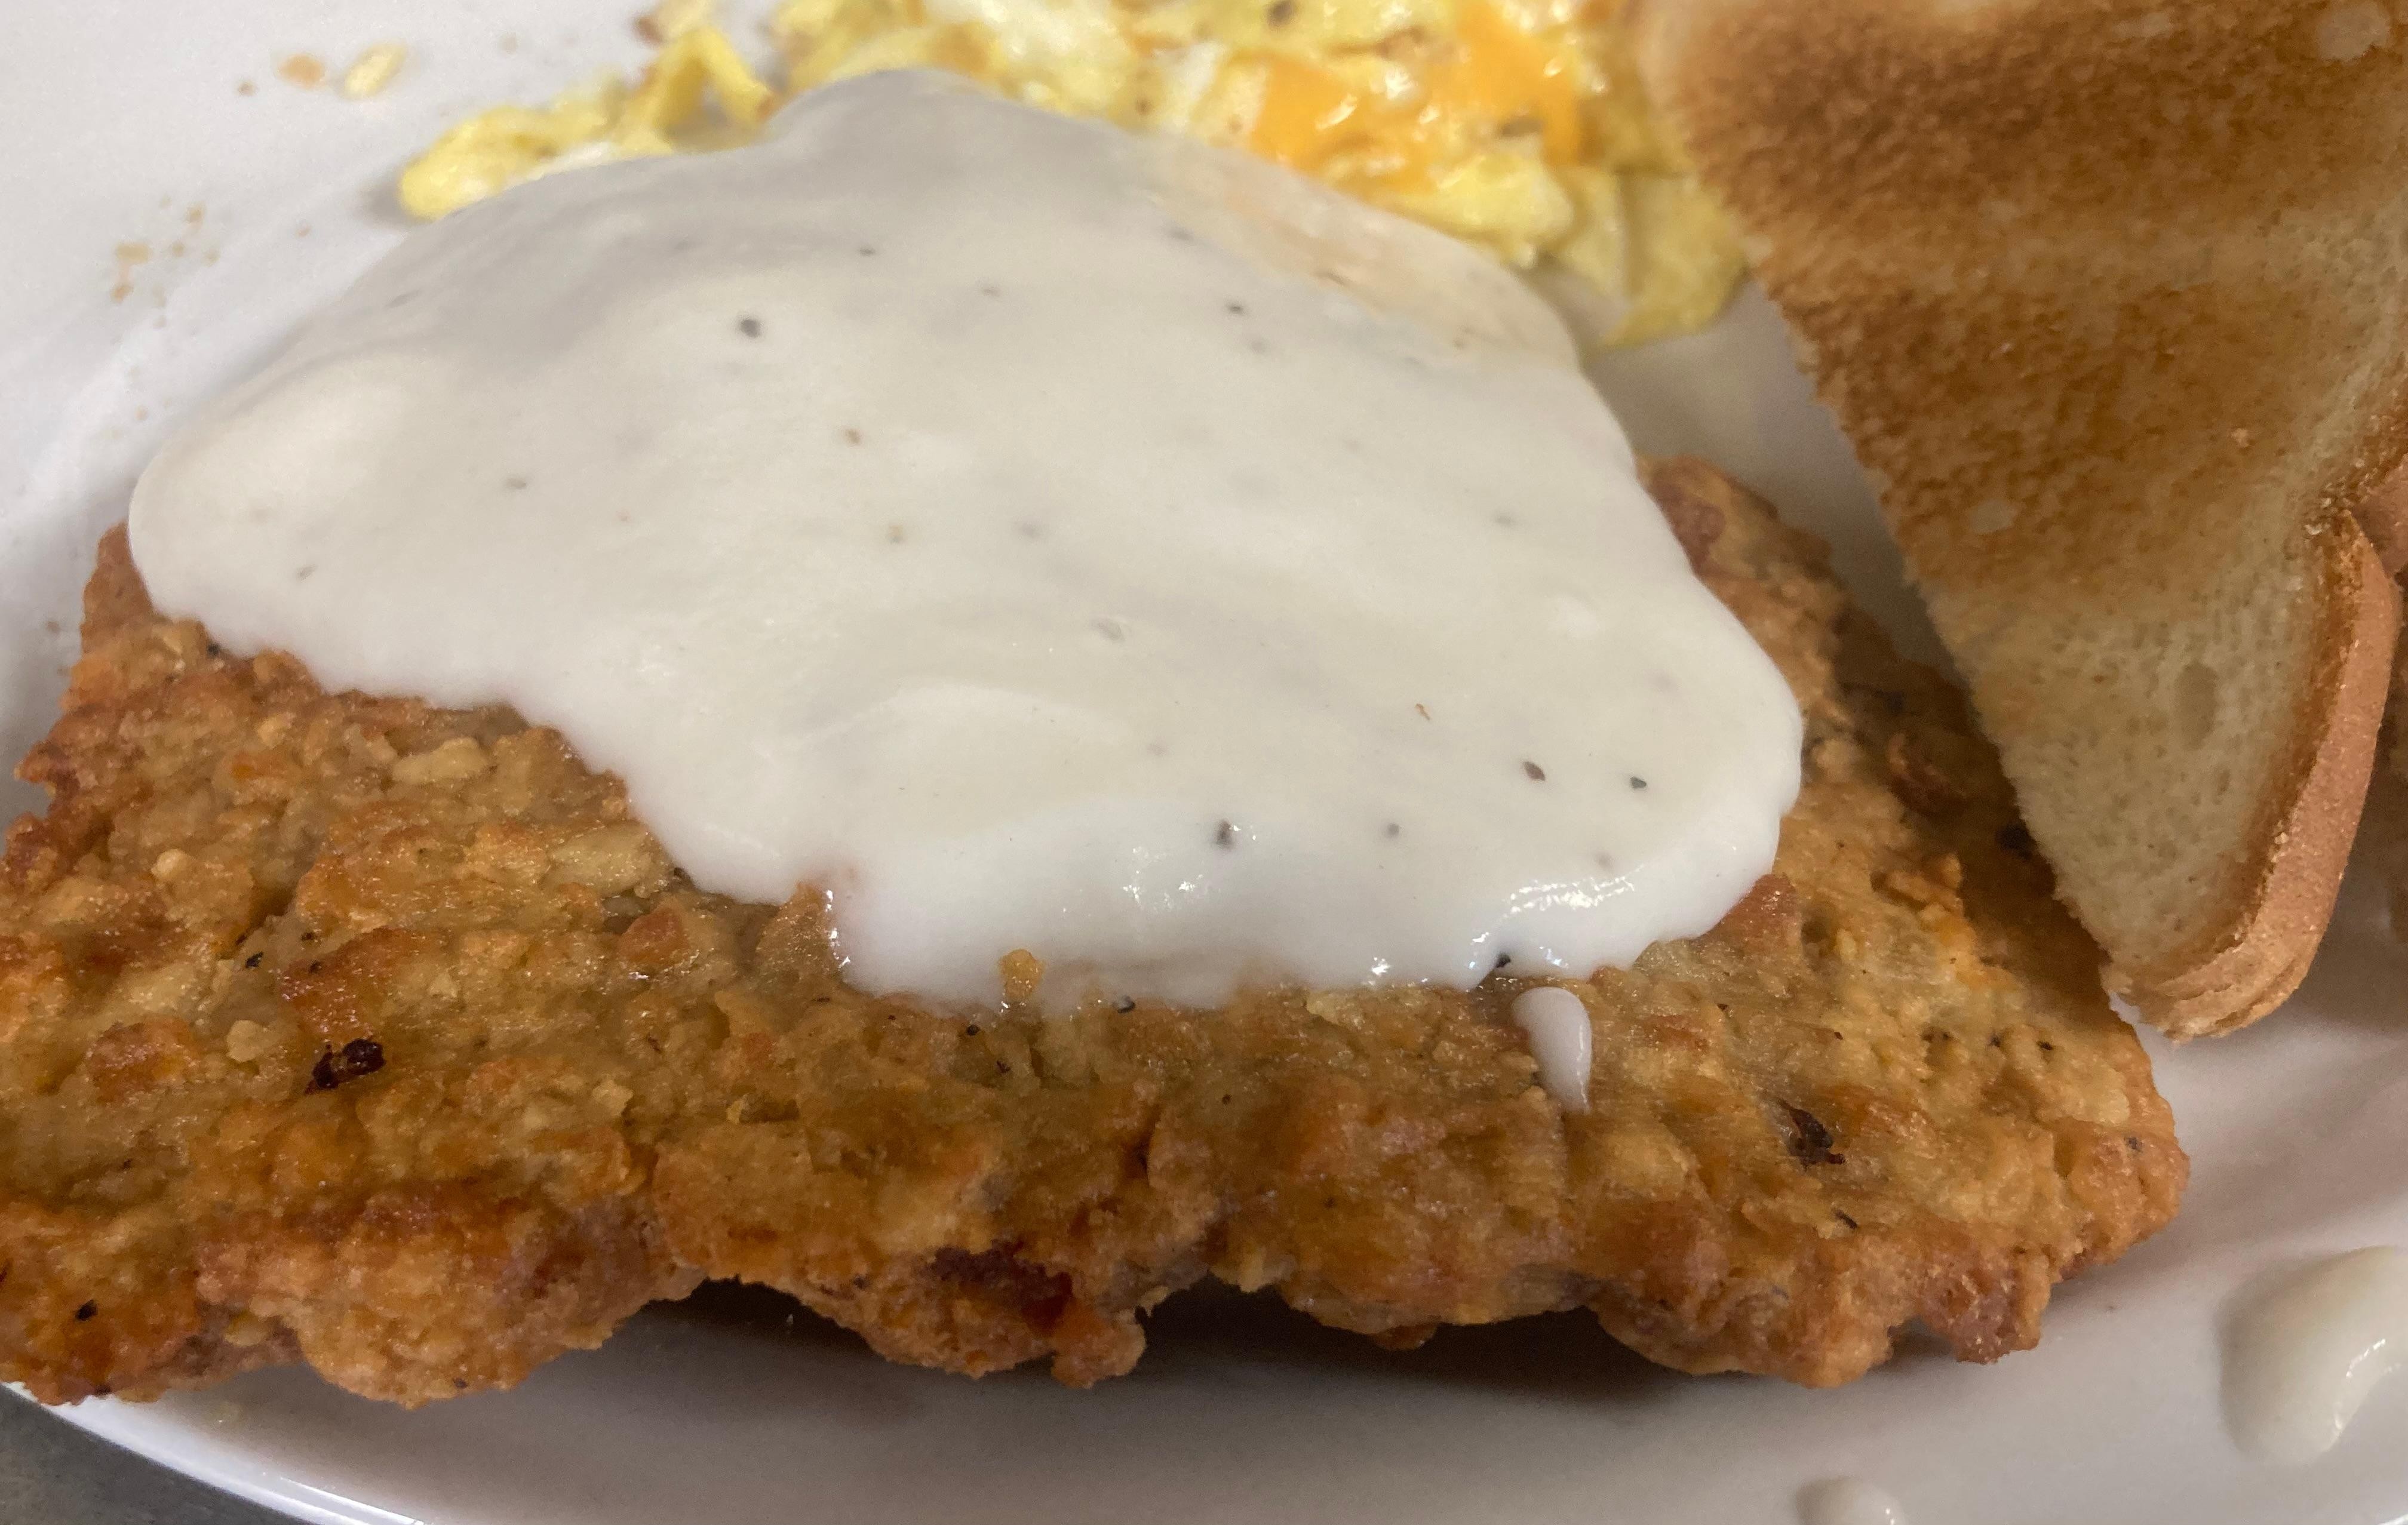 Country Fried Steak Jr and Egg